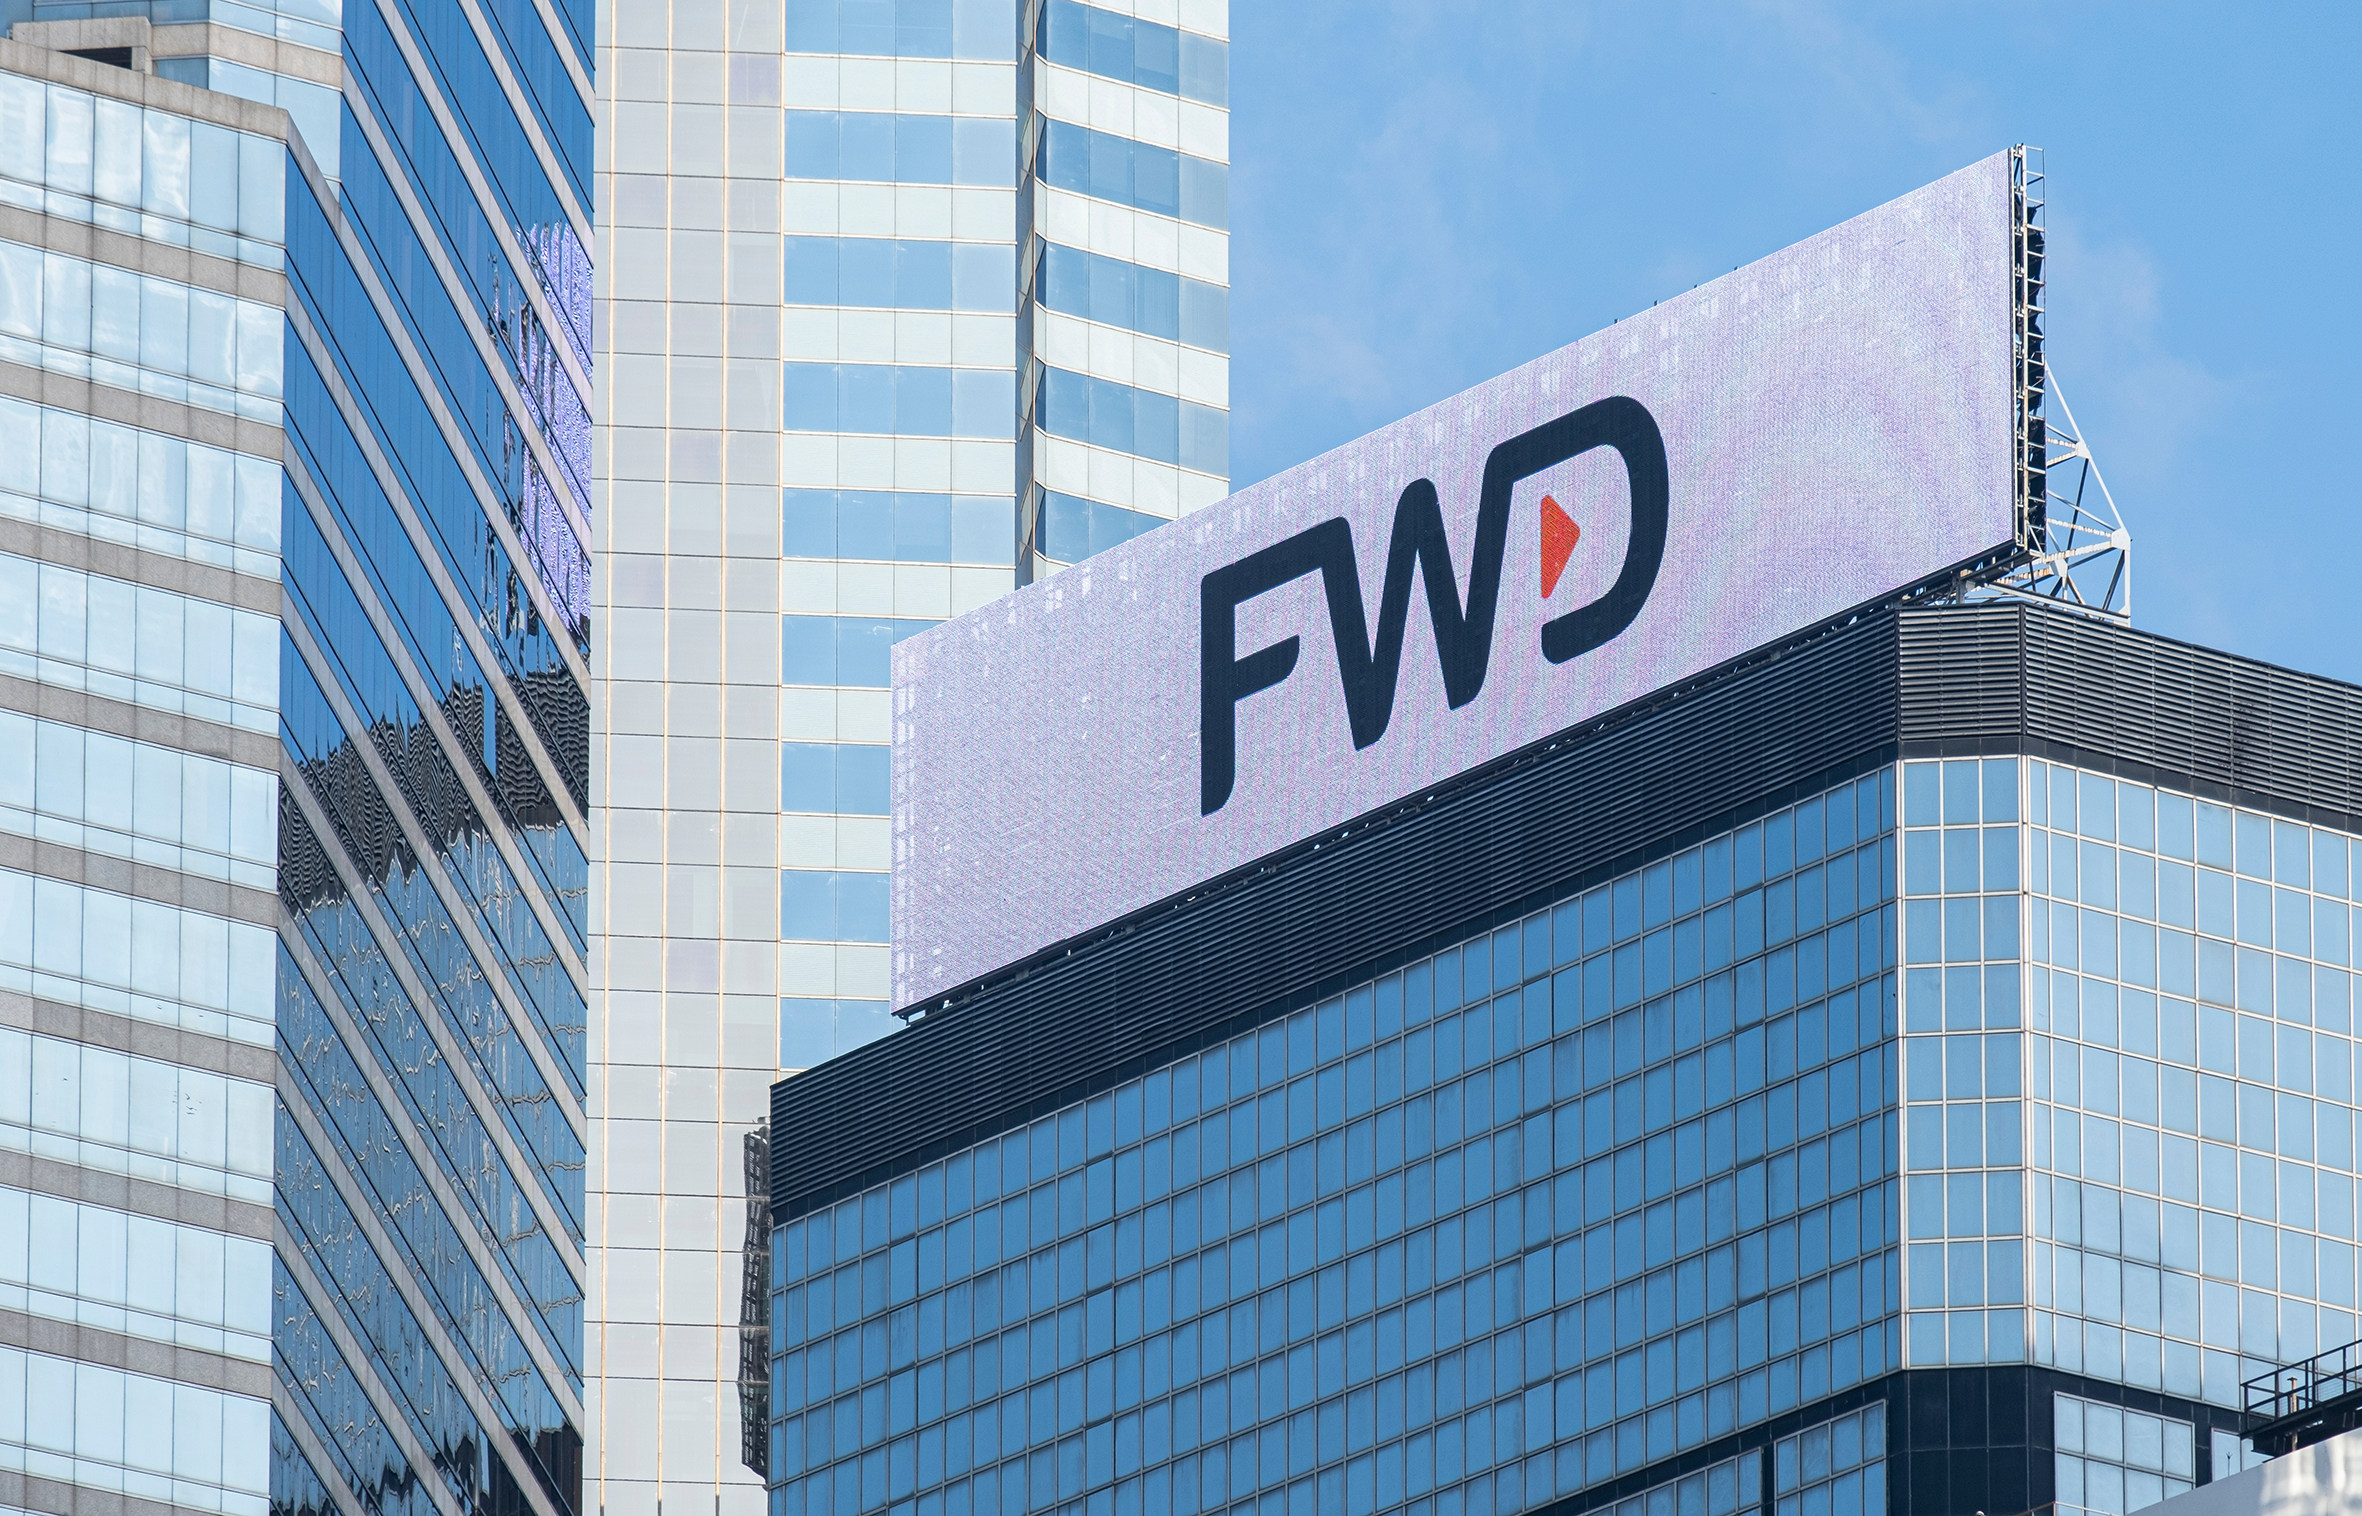 An undated photo of FWD’s corporate signage. Photo: Shutterstock